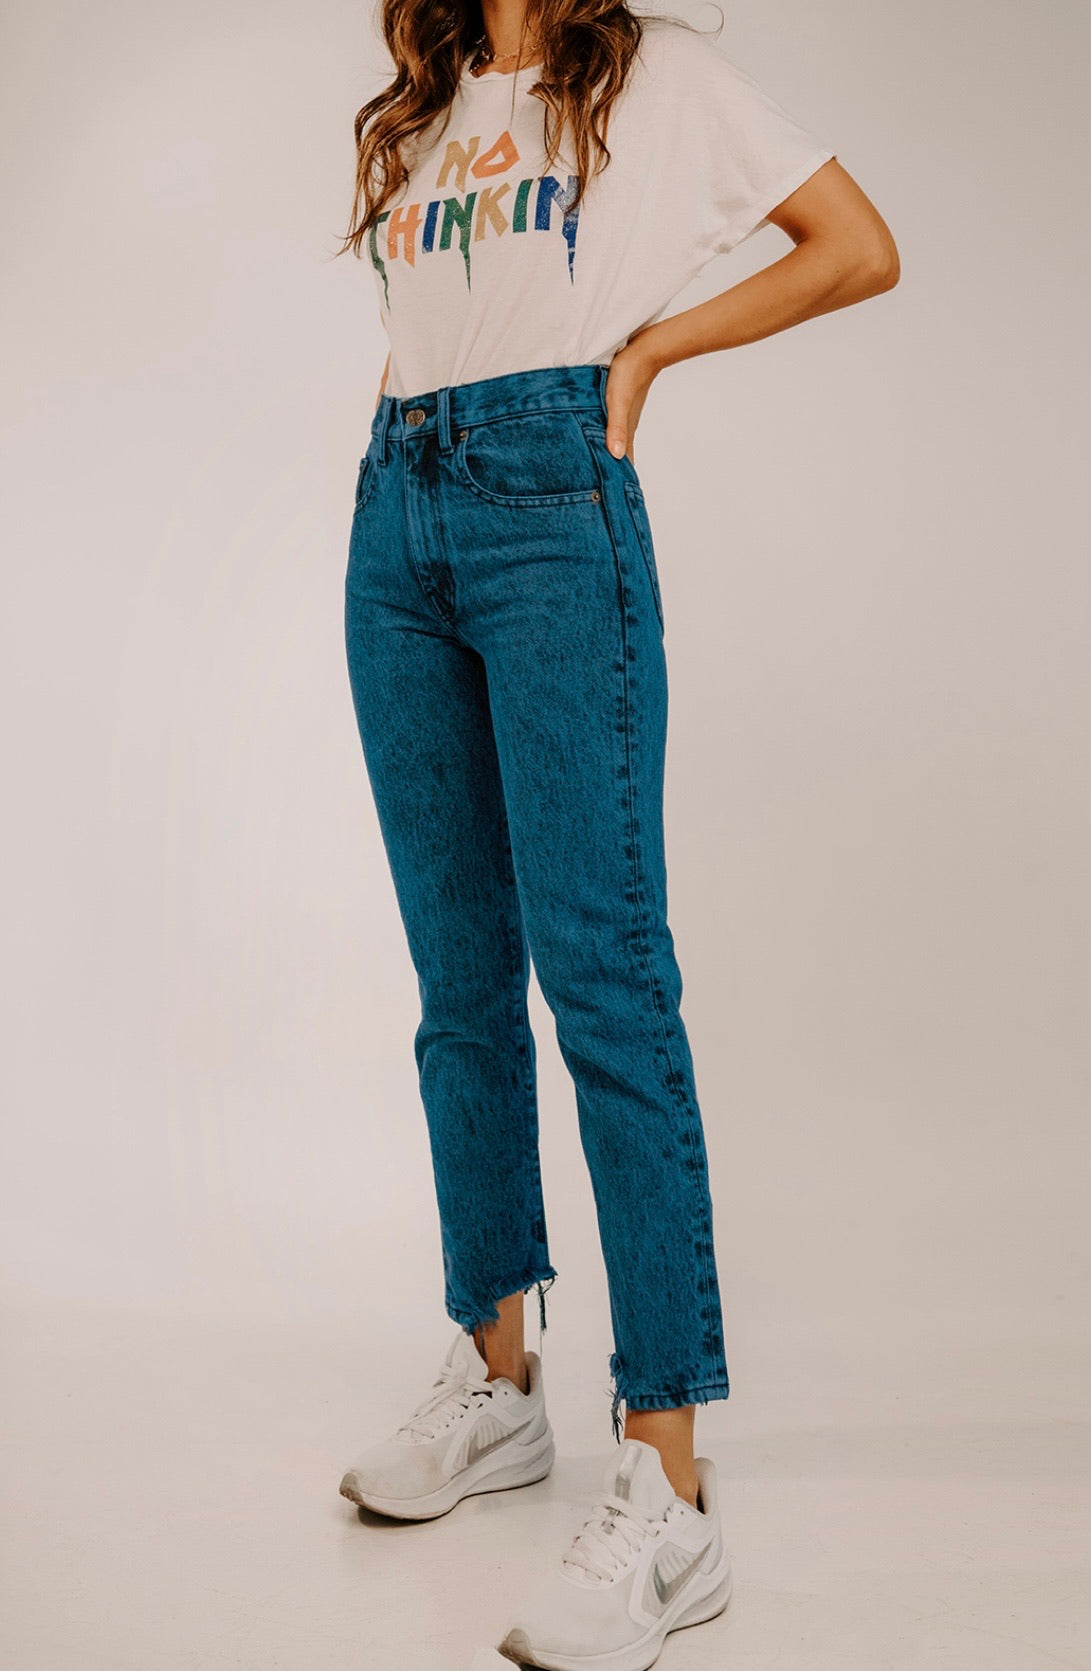 KENDALL marble blue jeans